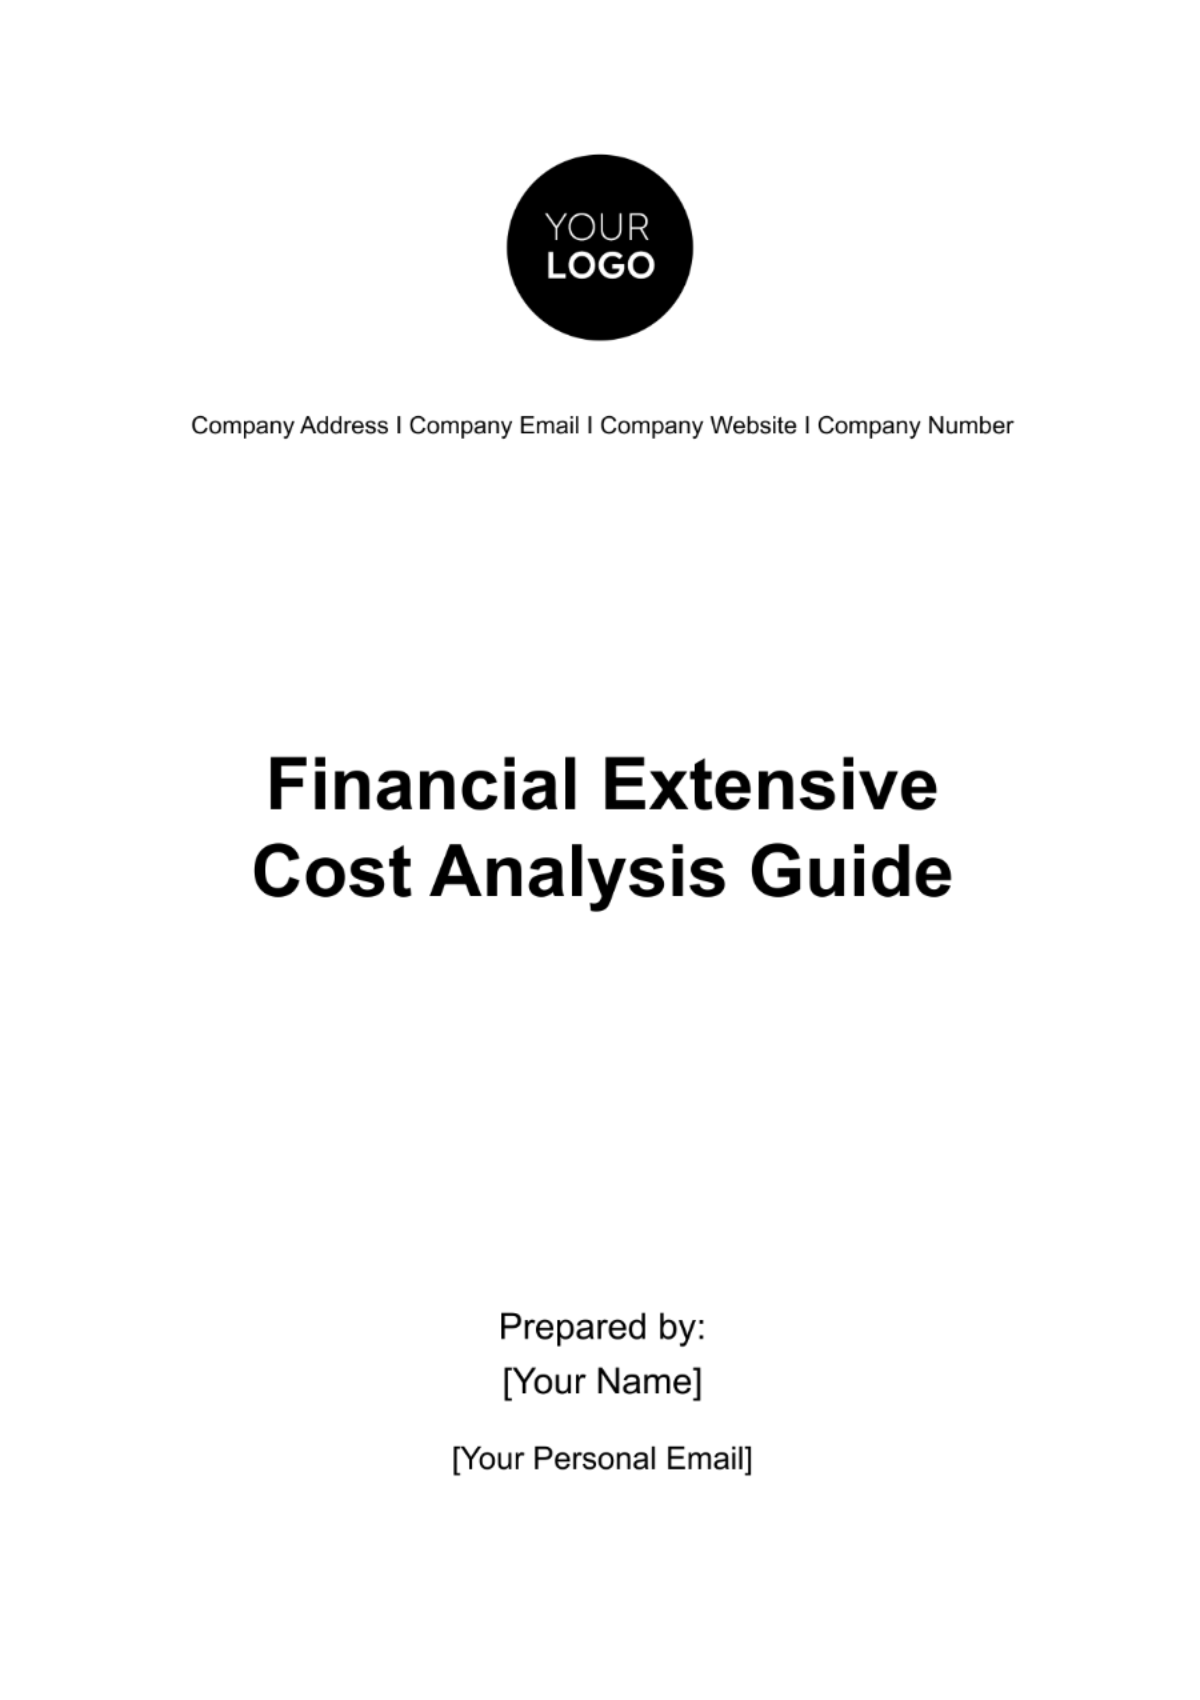 Financial Extensive Cost Analysis Guide Template